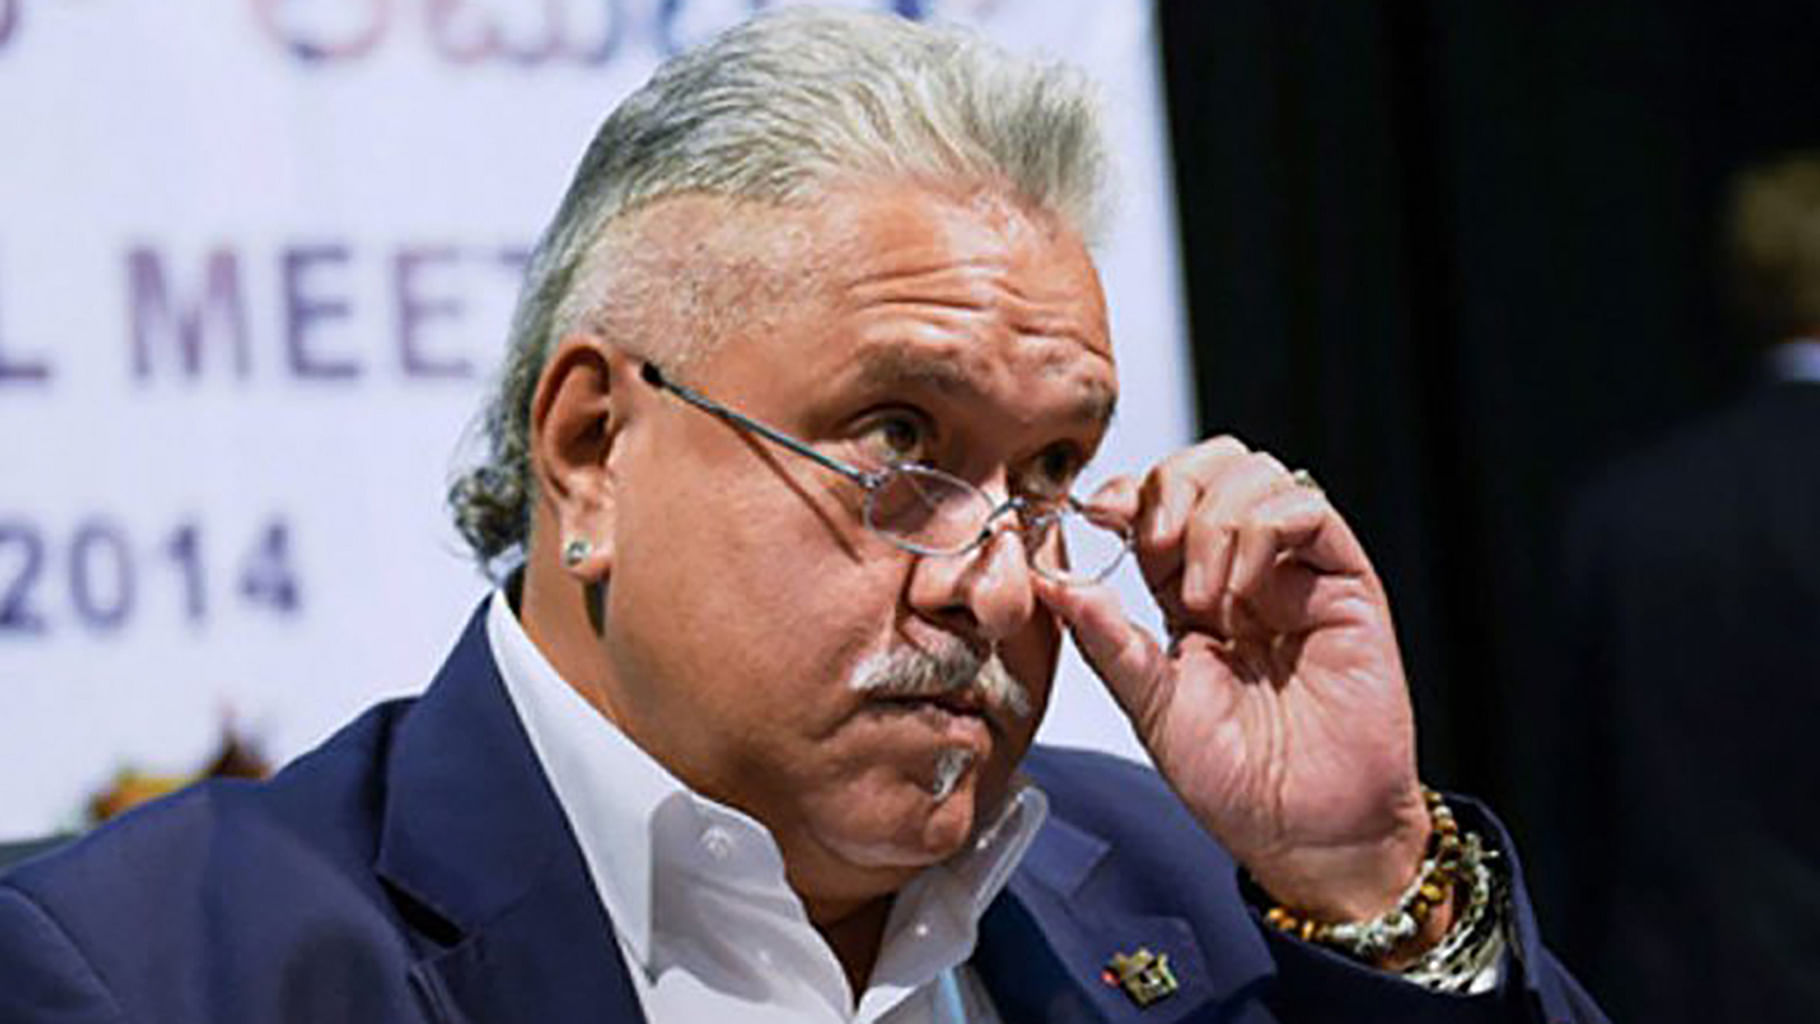 Vijay Mallya says he has become a ‘political football’ between the two major Indian parties. (Photo: PTI)